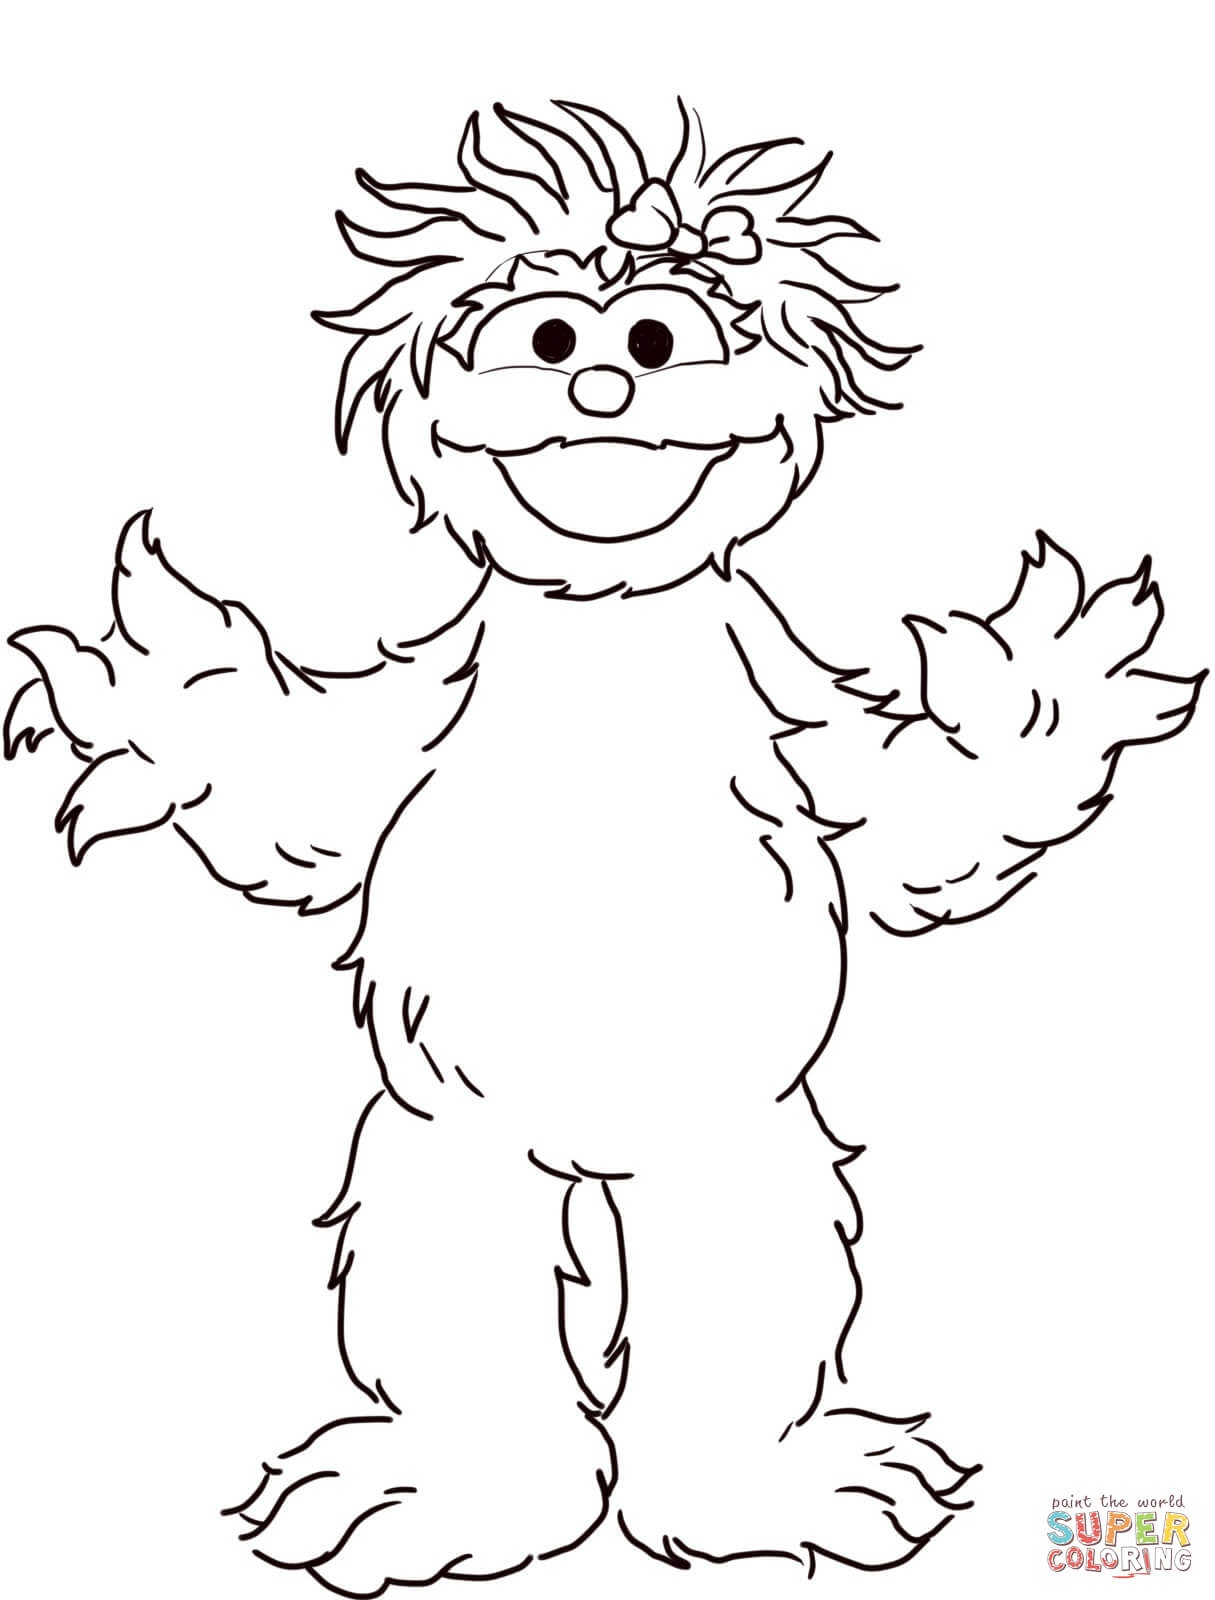 Sesame Street Rosita Coloring Page | Free Printable Coloring Pages - Free Printable Coloring Pages Sesame Street Characters